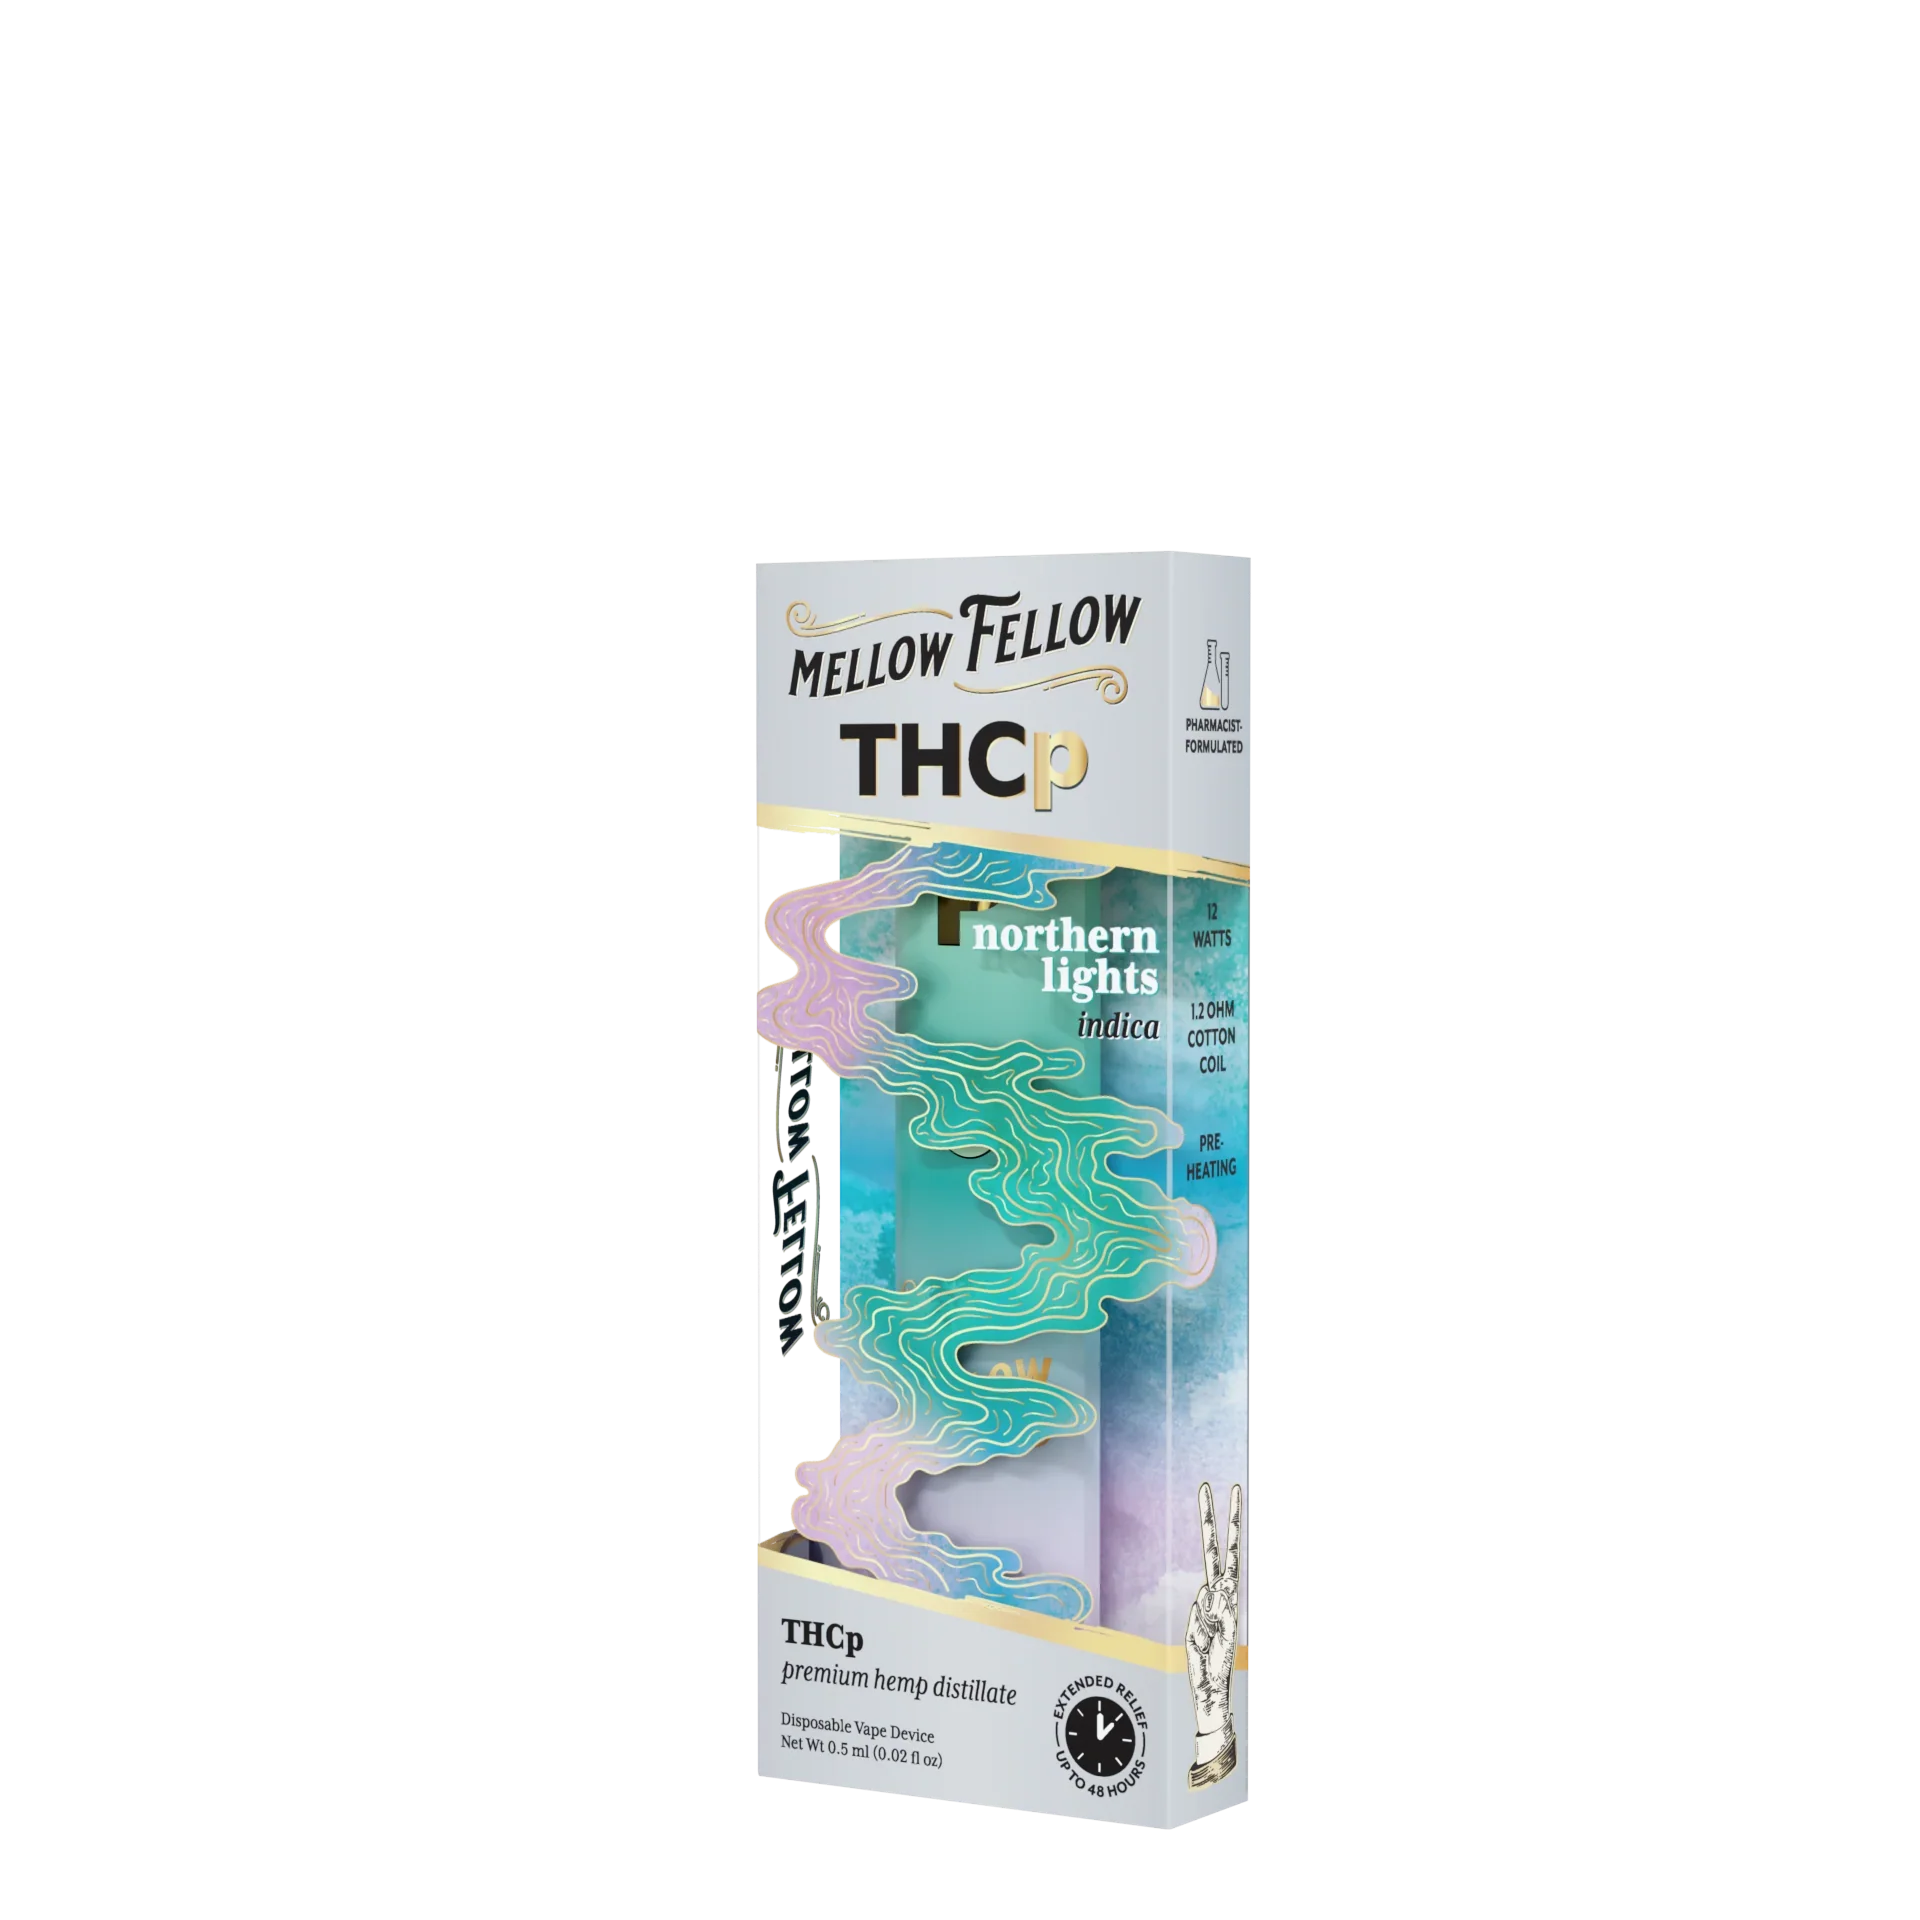 Mellow Fellow THCp 0.5g Disposable Vape - Northern Lights (Indica) Best Price